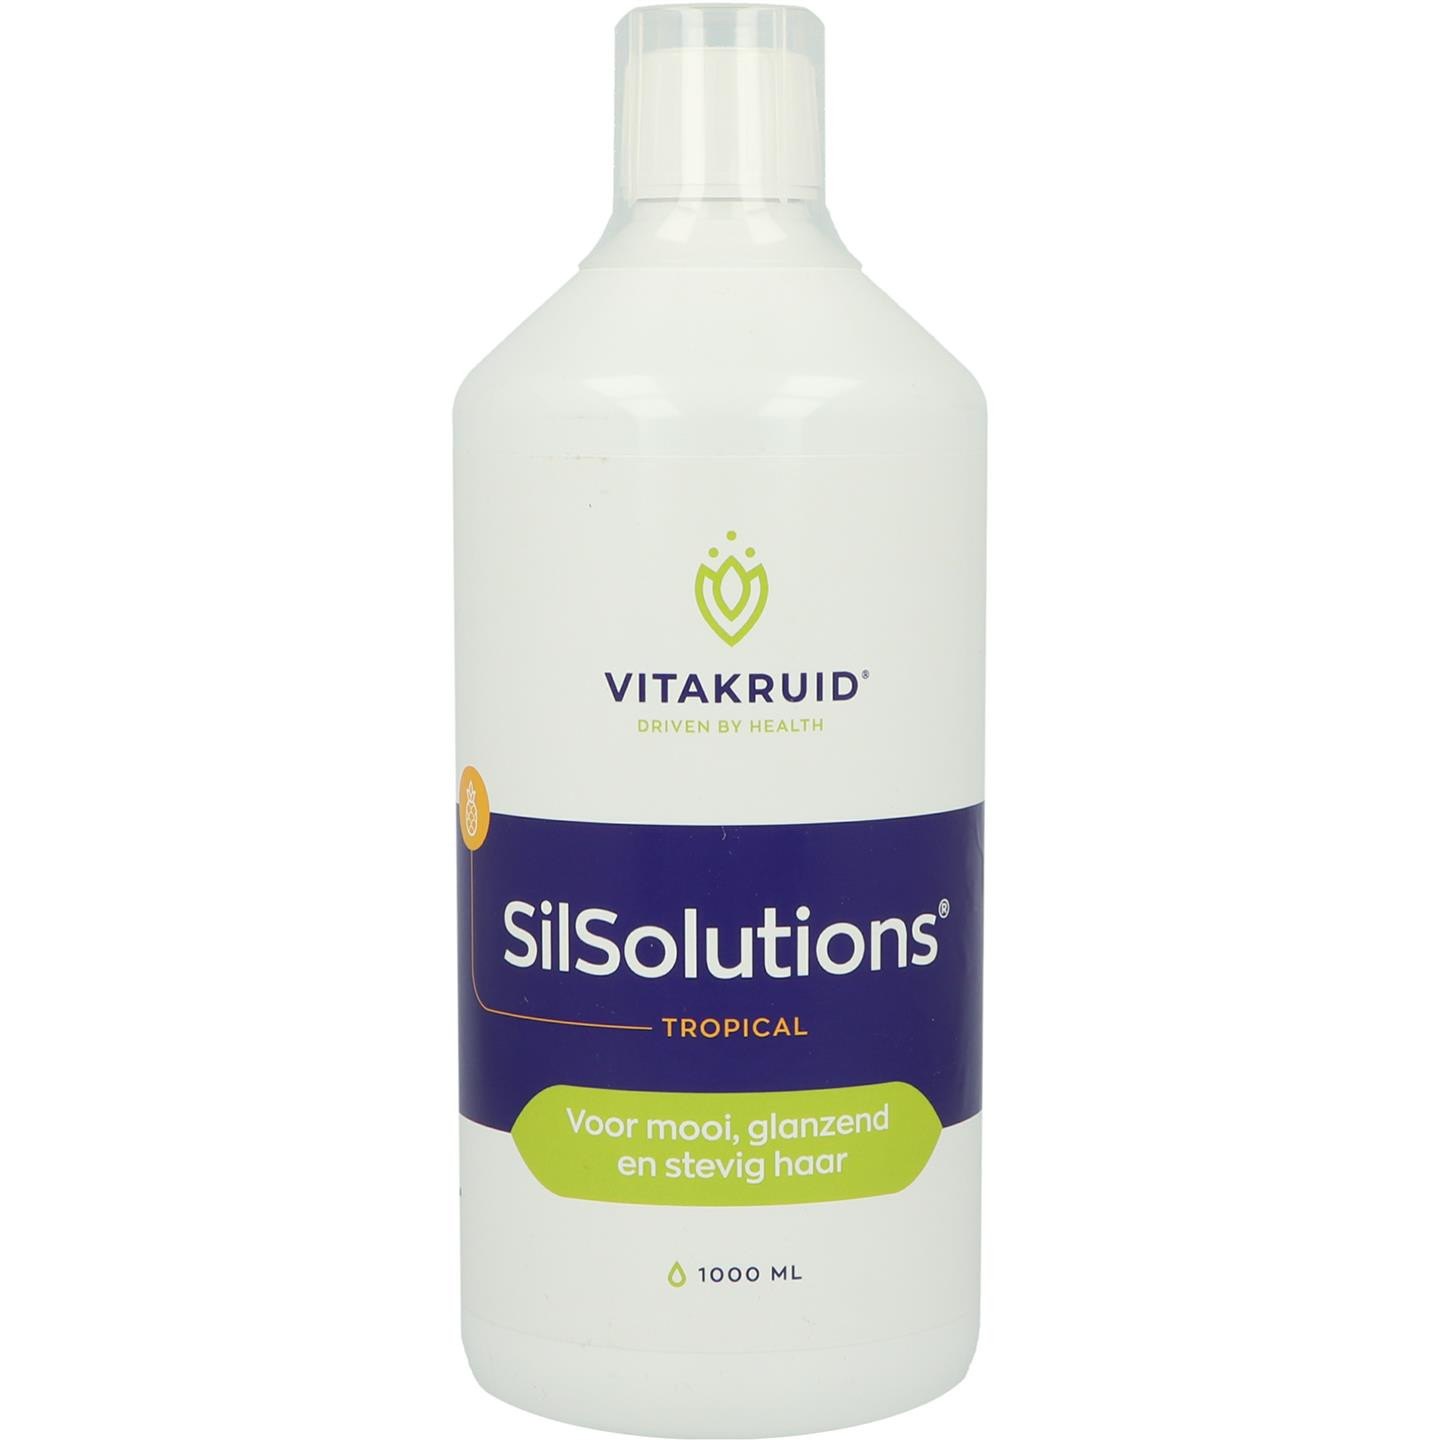 SilSolutions Tropical